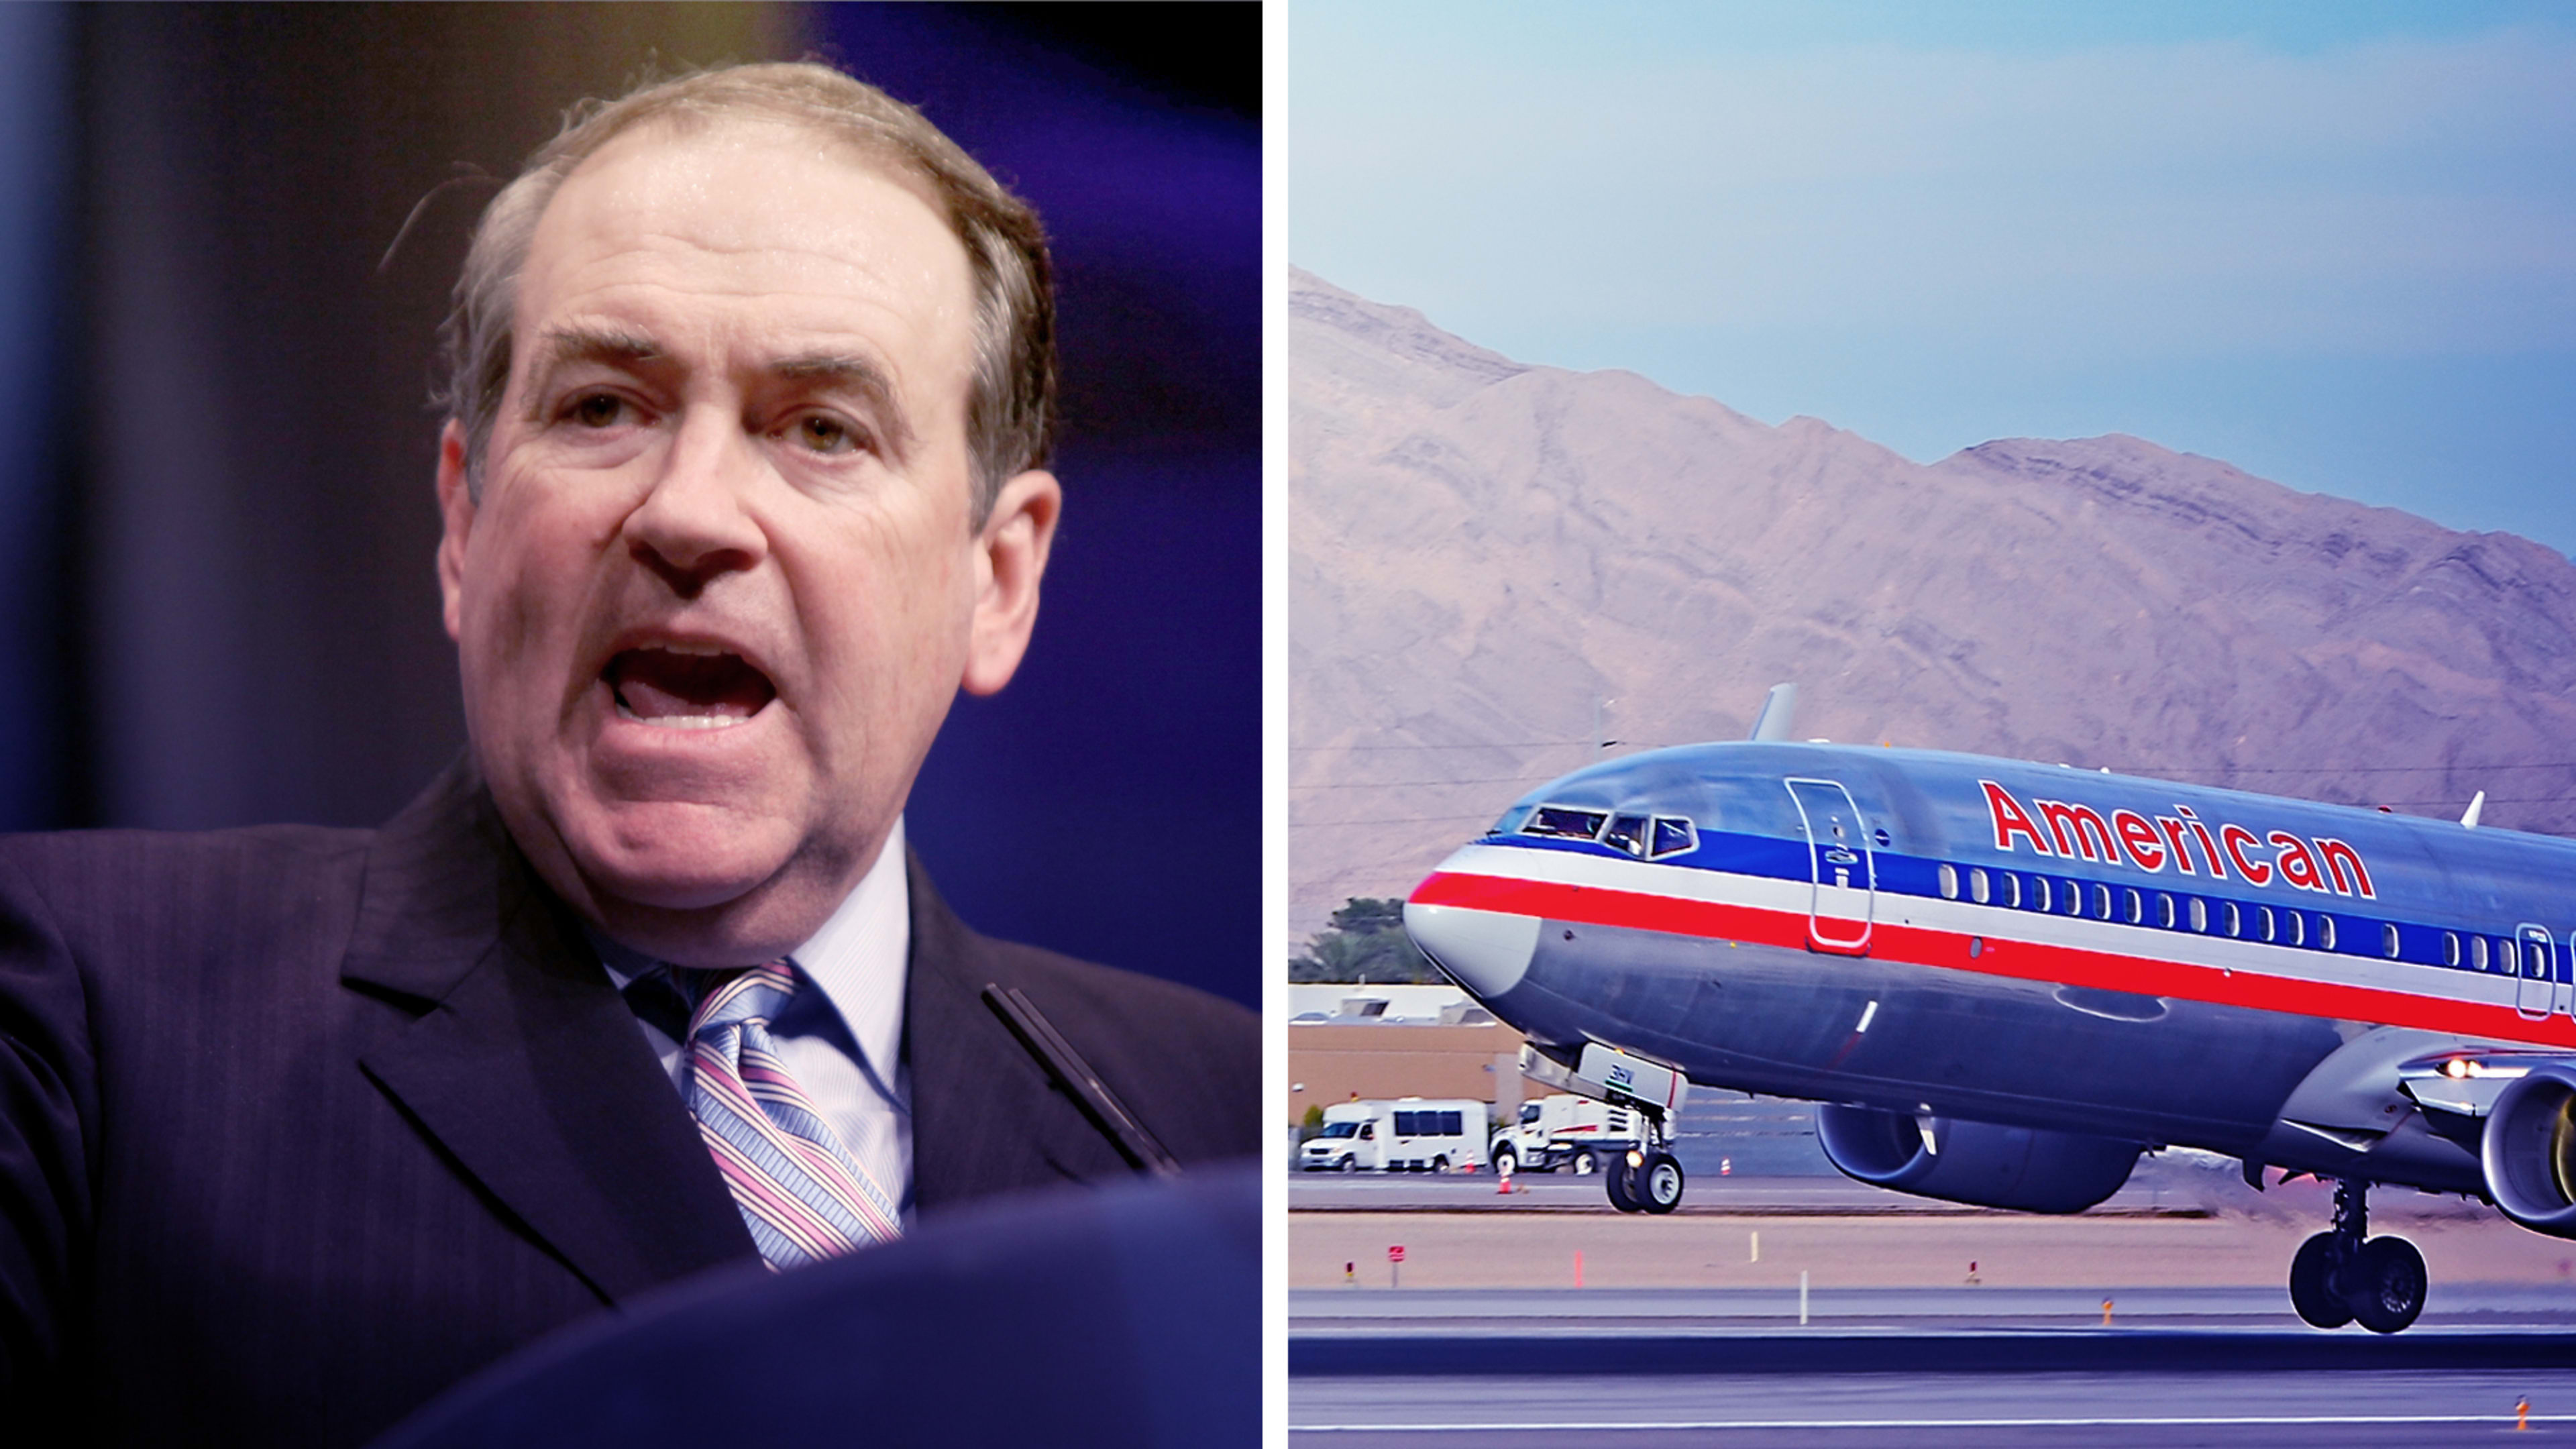 Mike Huckabee live tweeted his American Airlines flight and left his heart in LA